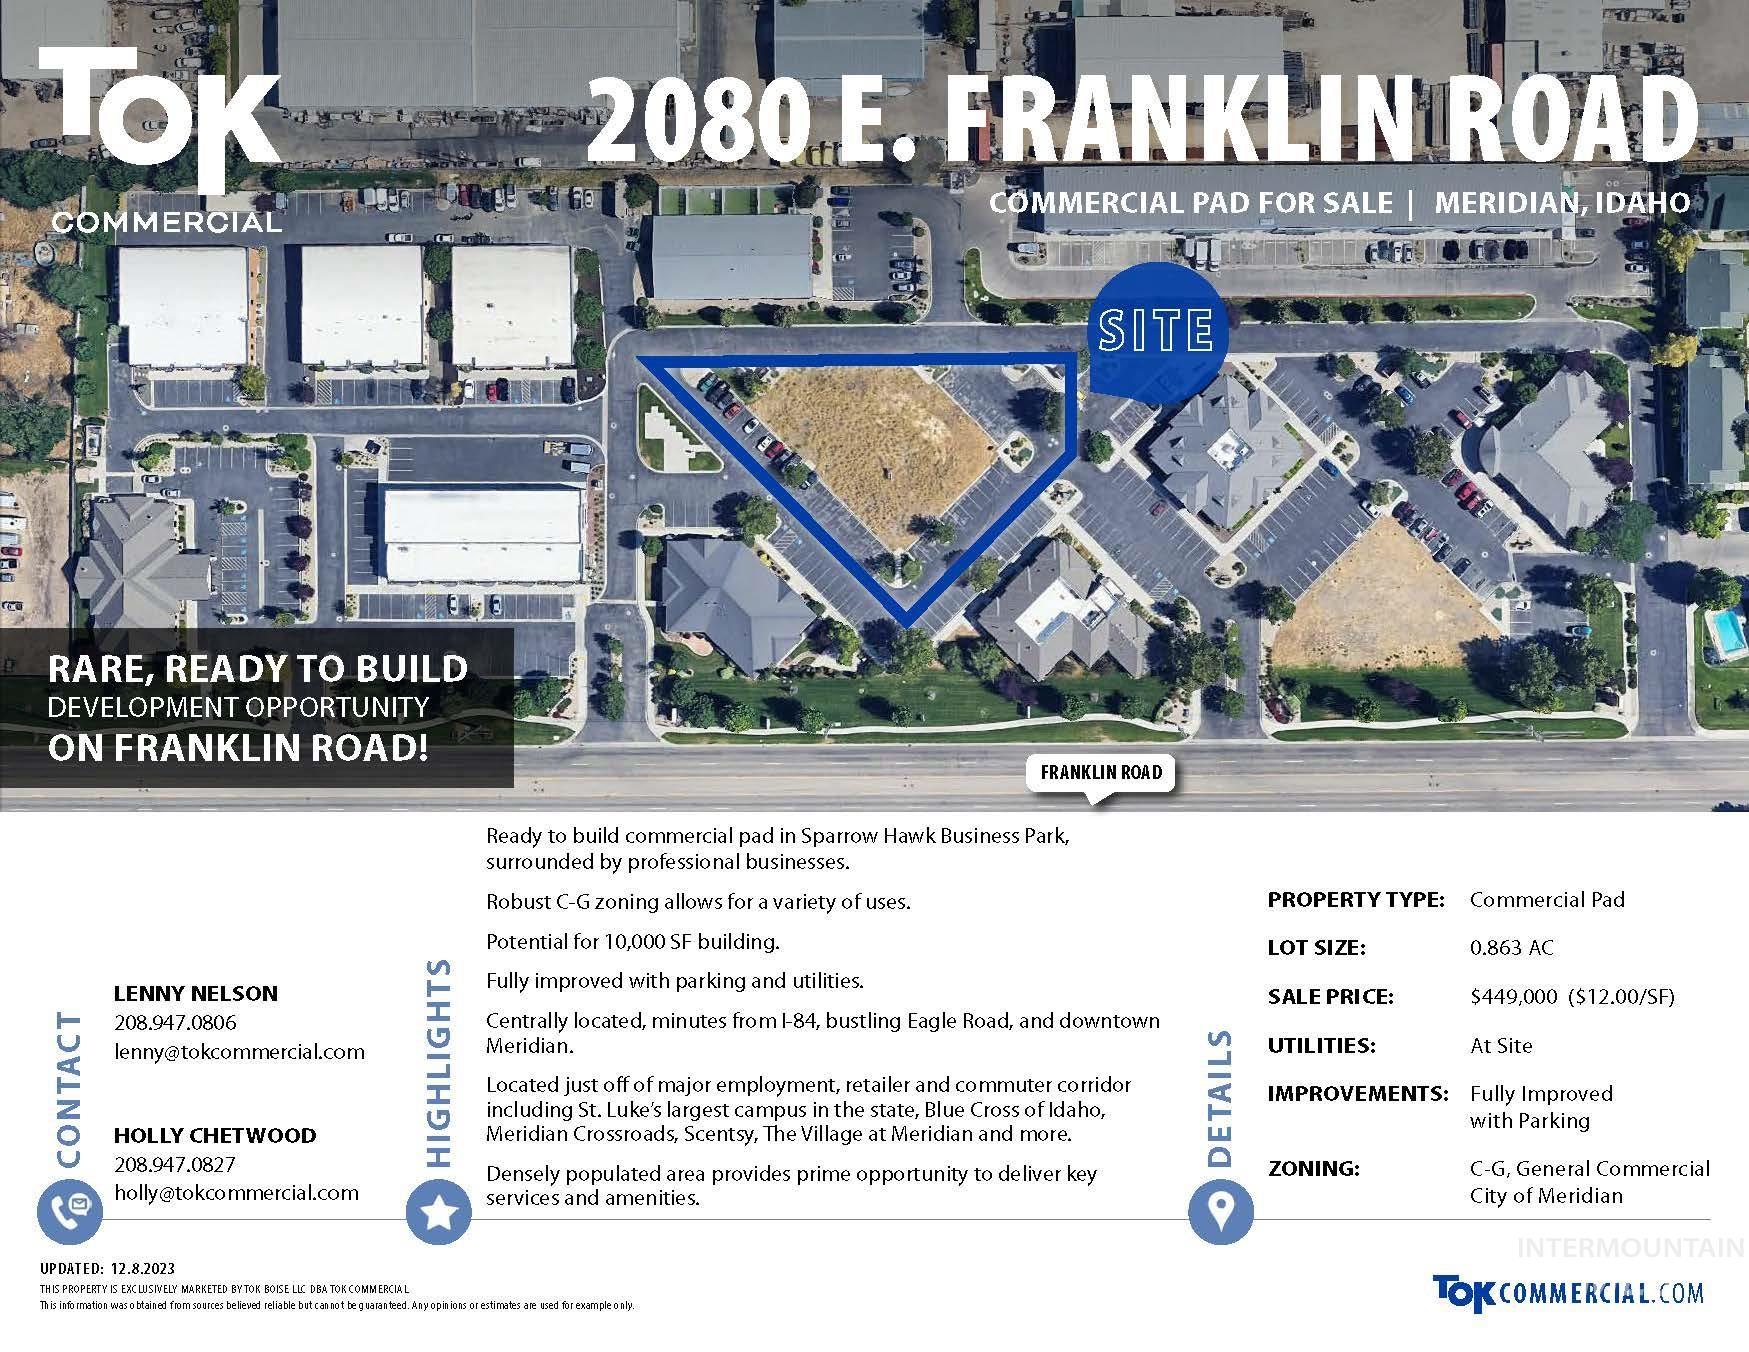 2080 E Franklin Rd, Meridian, Idaho 83642, Land For Sale, Price $449,000,MLS 98900373